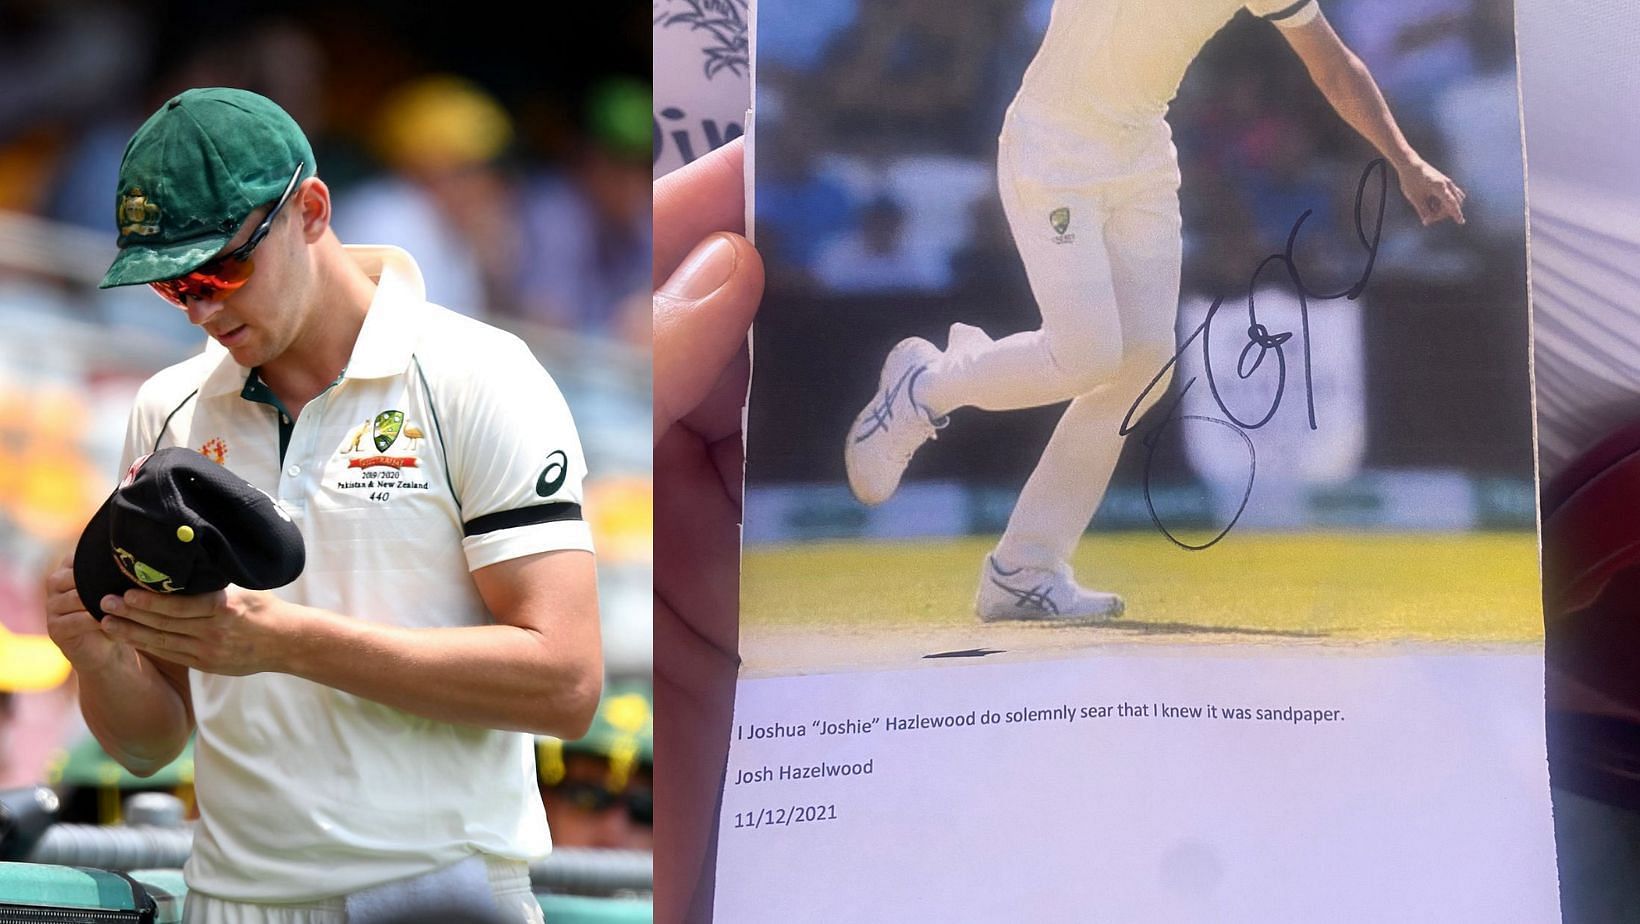 Representative photo of Josh Hazlewood (L) and the picture that he signed on Saturday (R).